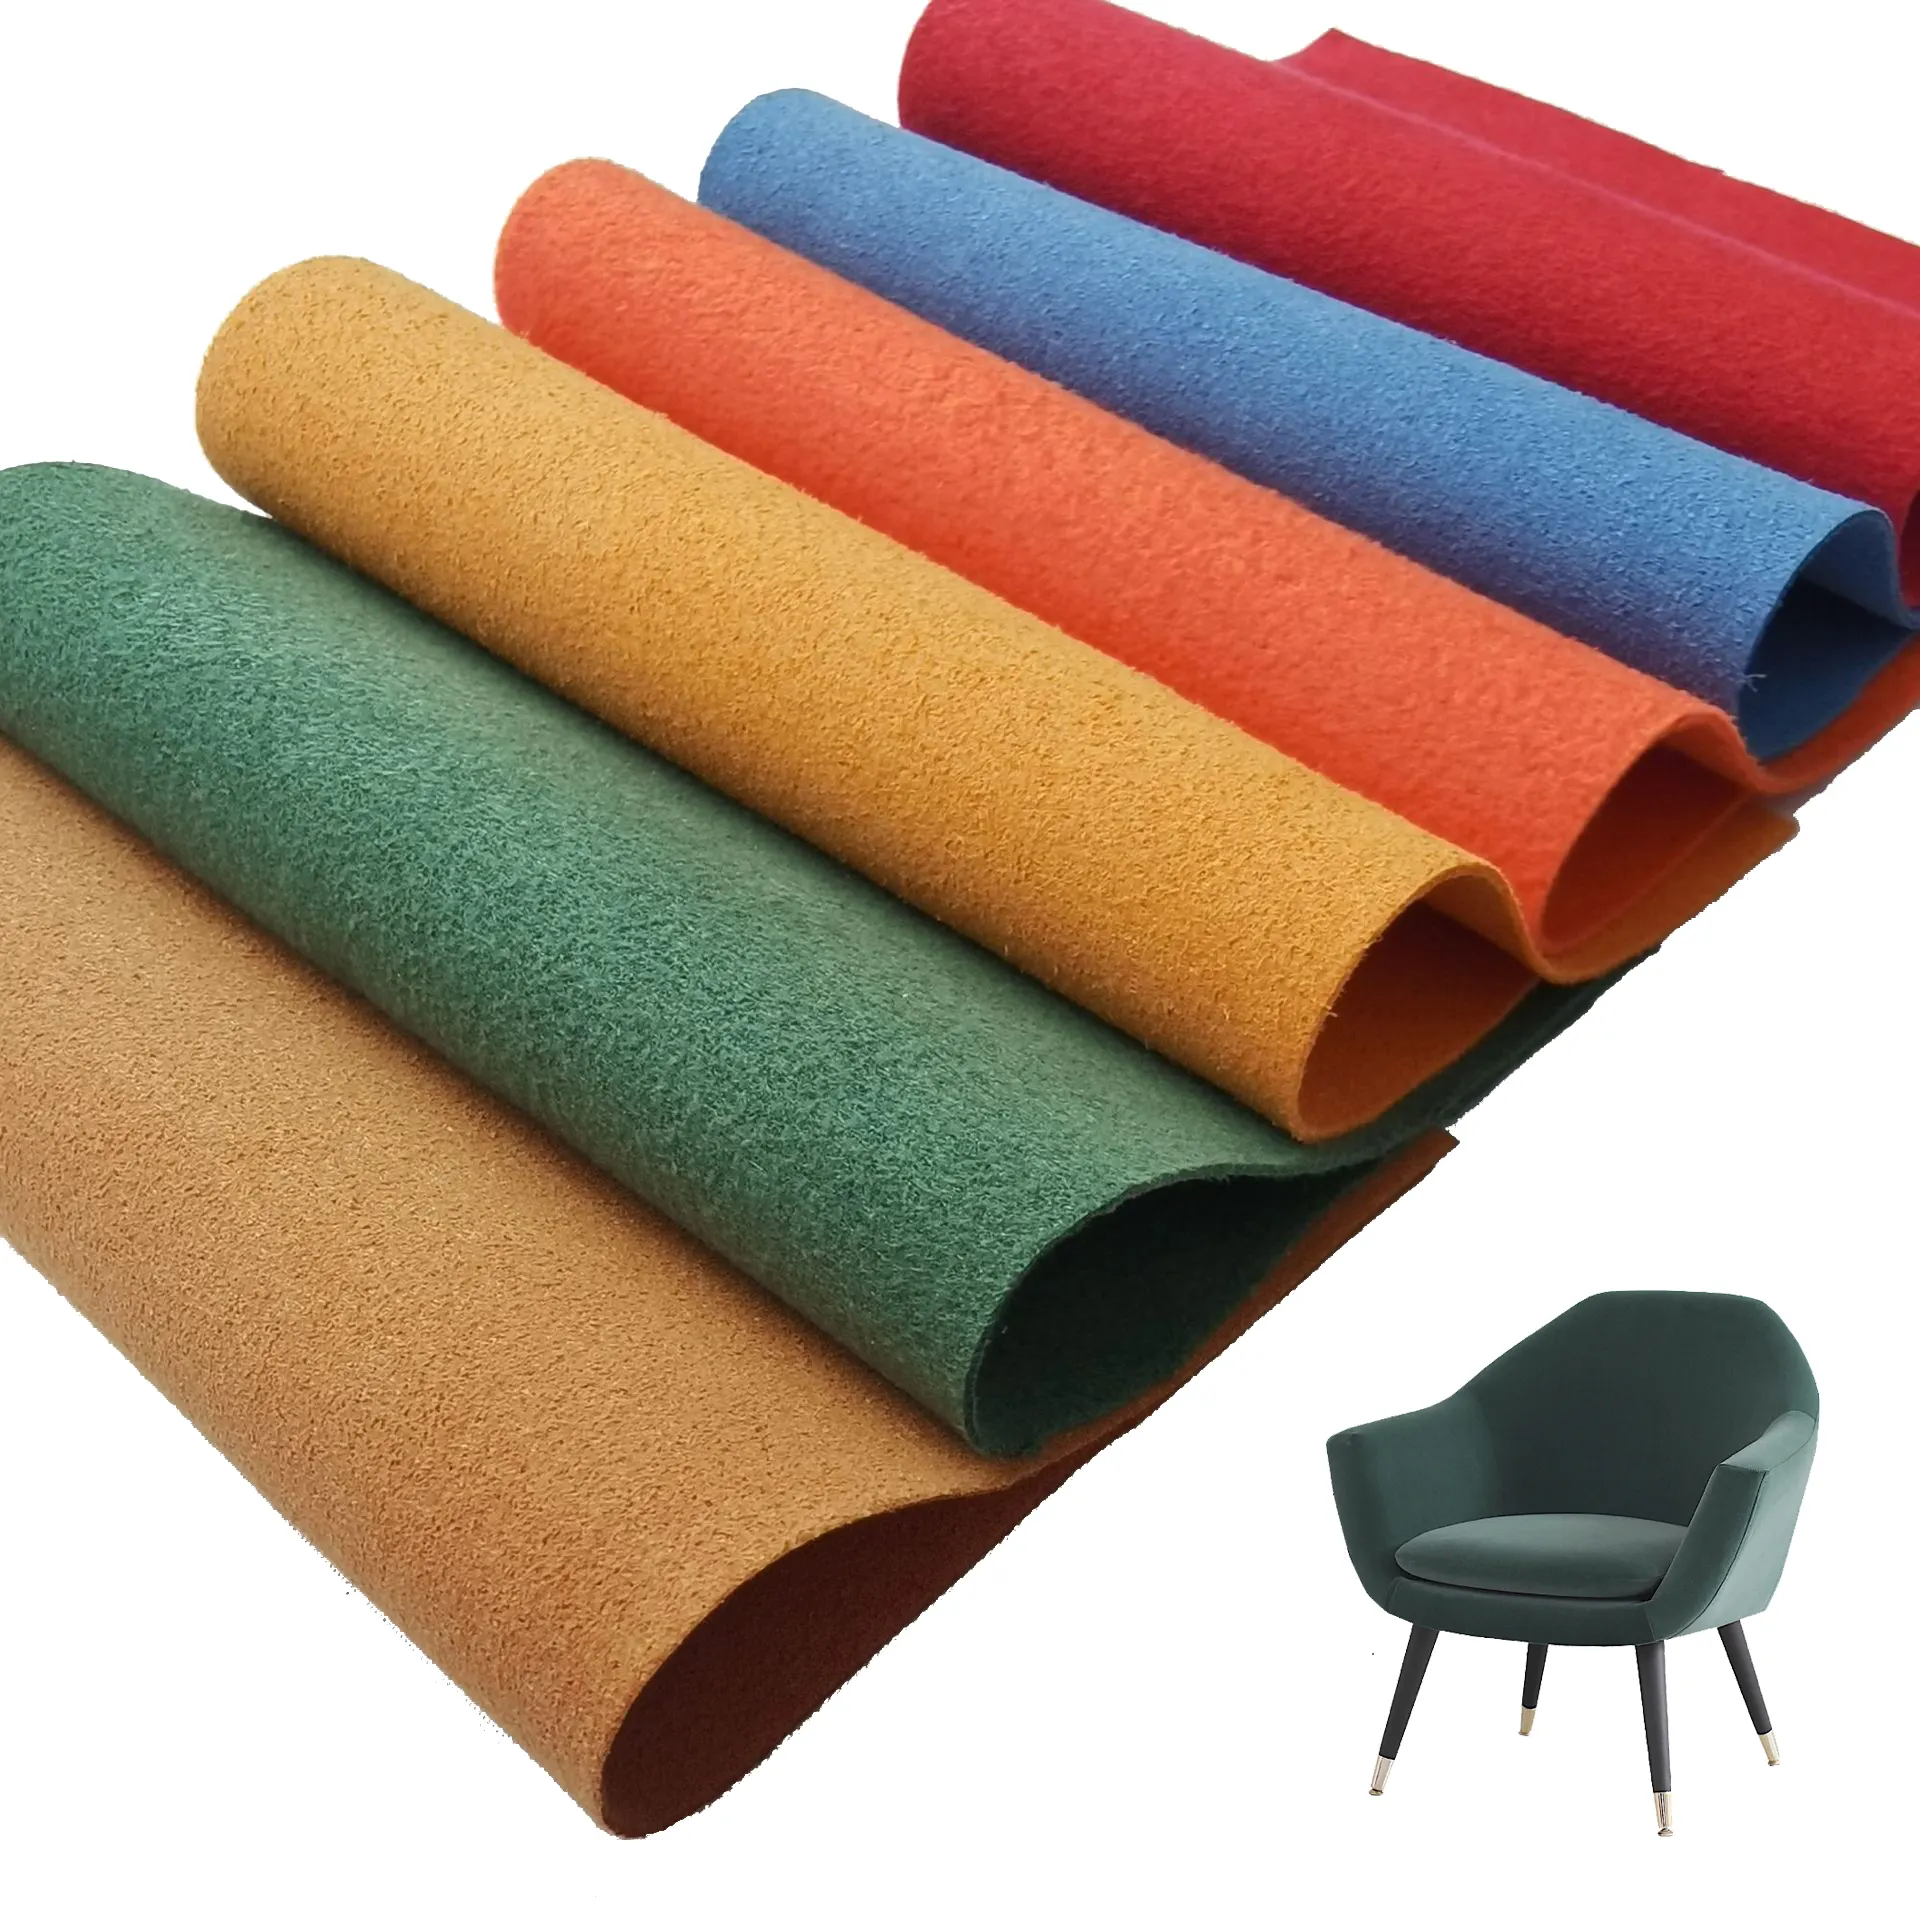 Green Color Double Face Suede Microfiber Leather For Making Chair Sofa Faux Leather Fabric For Shoes Making Material Car Seat